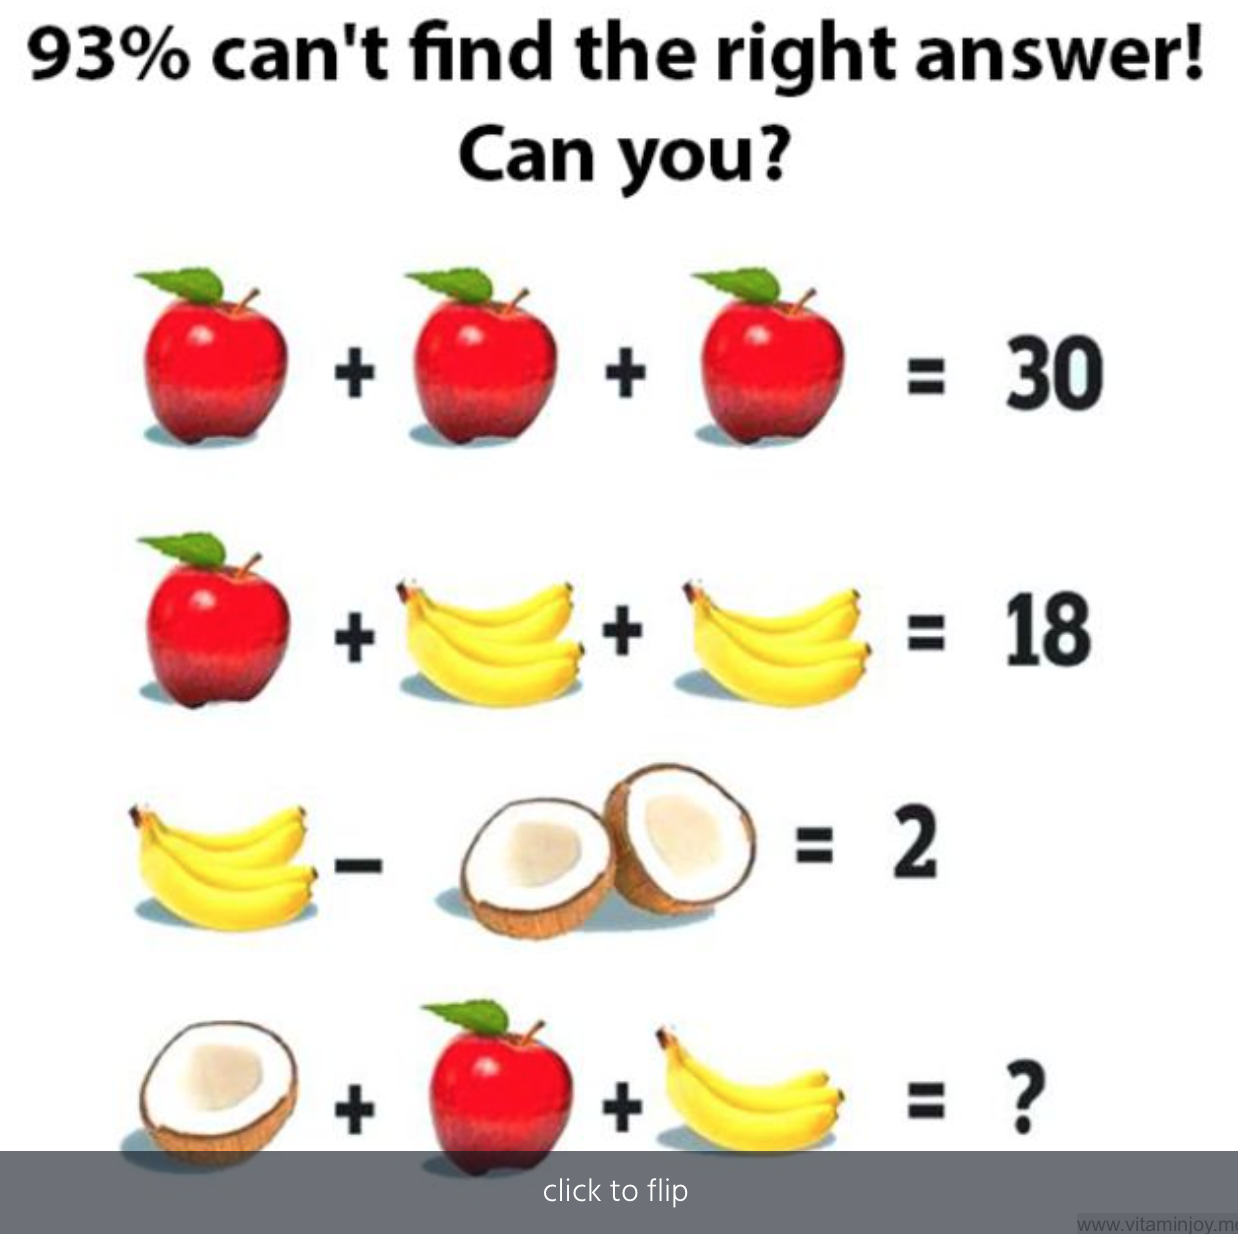 Find the right answers